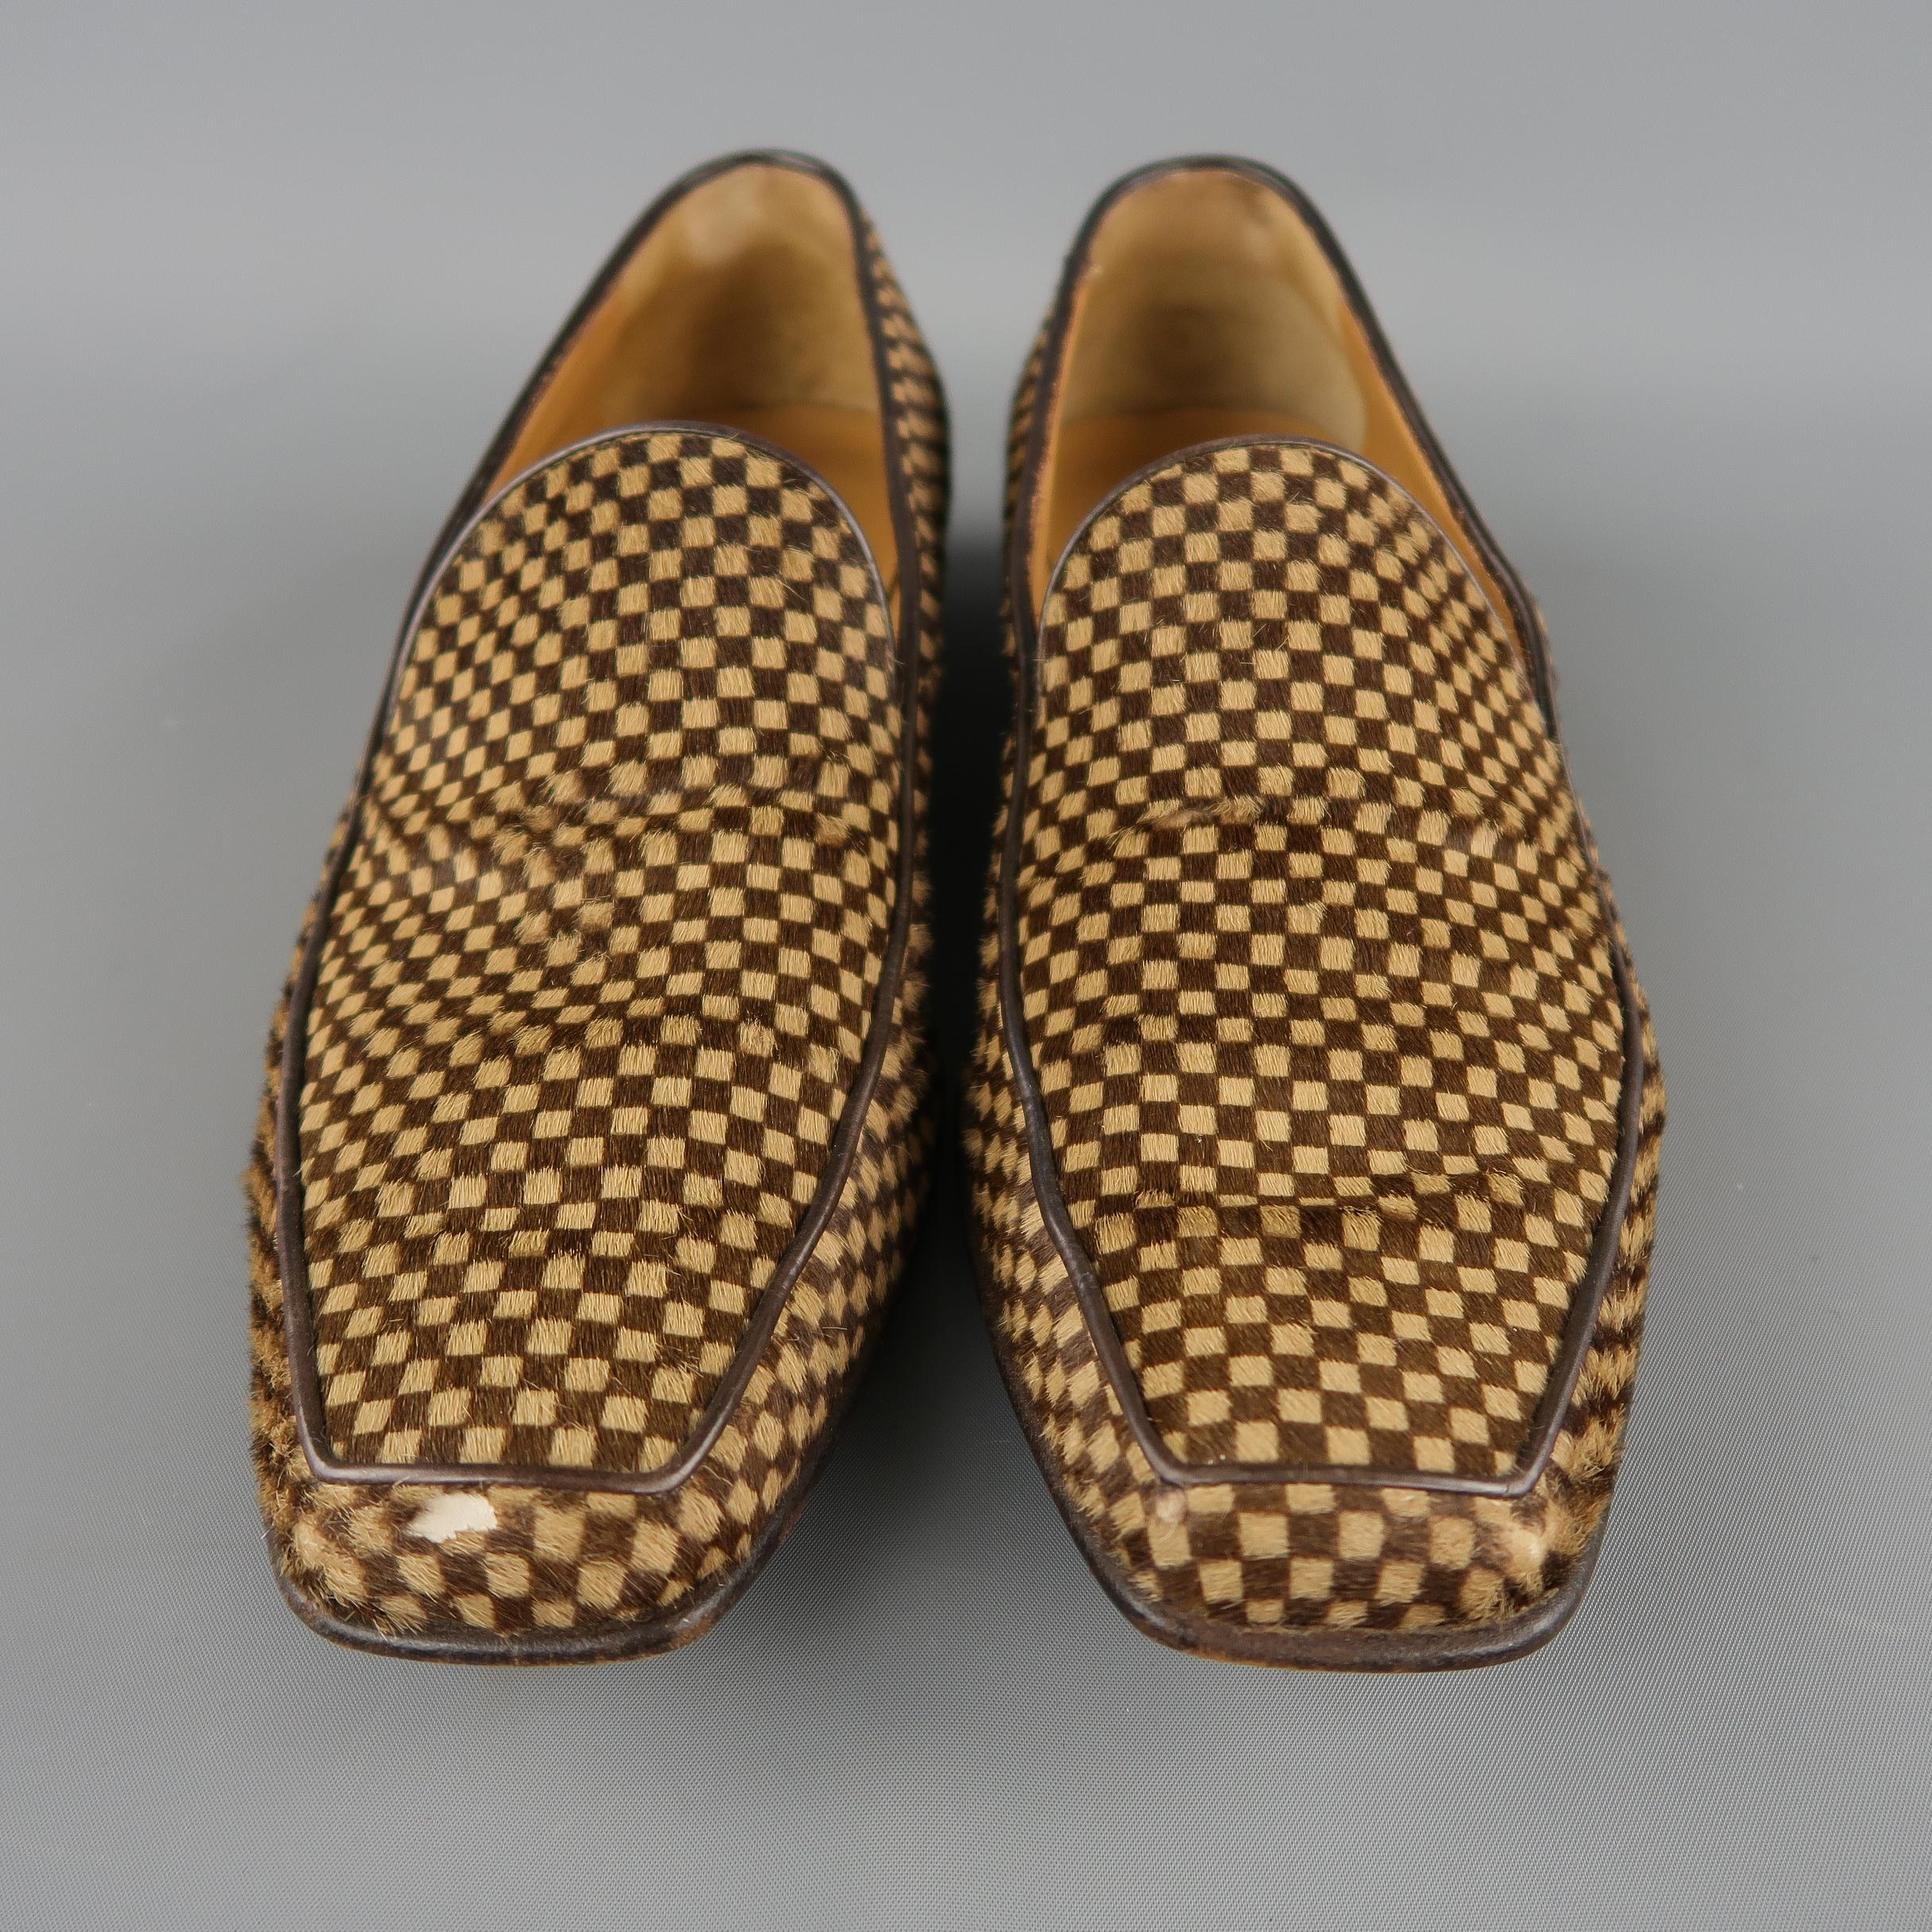 lv checkered shoes